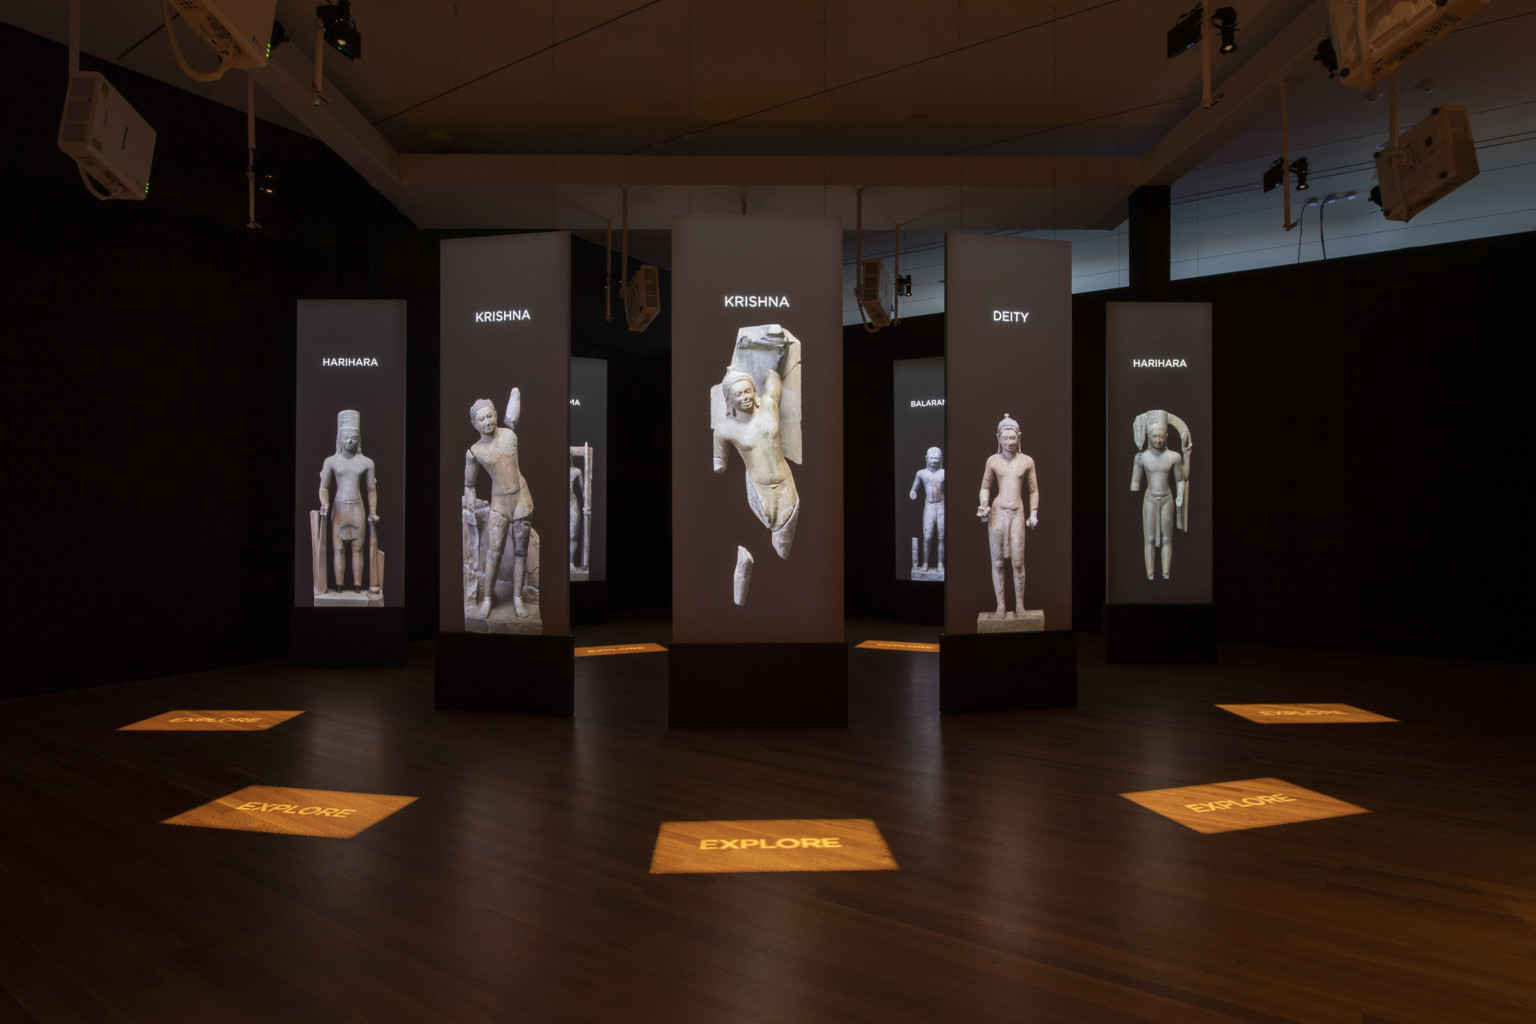 a darkened room with screens and stone statue images suspended in a circle pattern with illuminated signage on the wood floor